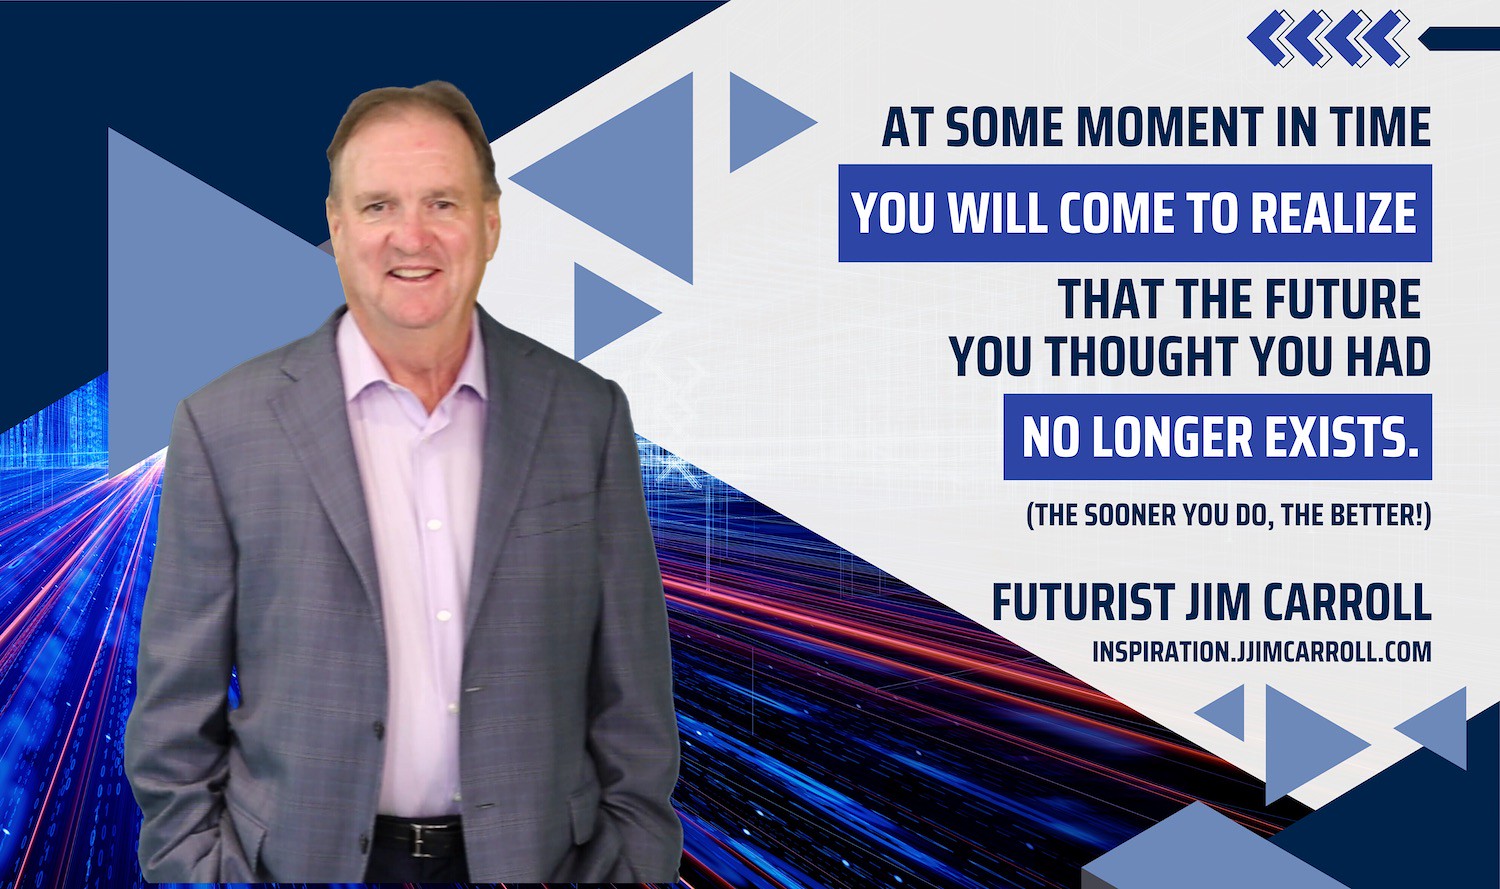 "At some moment in time, you will come to realize that the future you thought had no longer exists!" - Futurist Jim Carroll